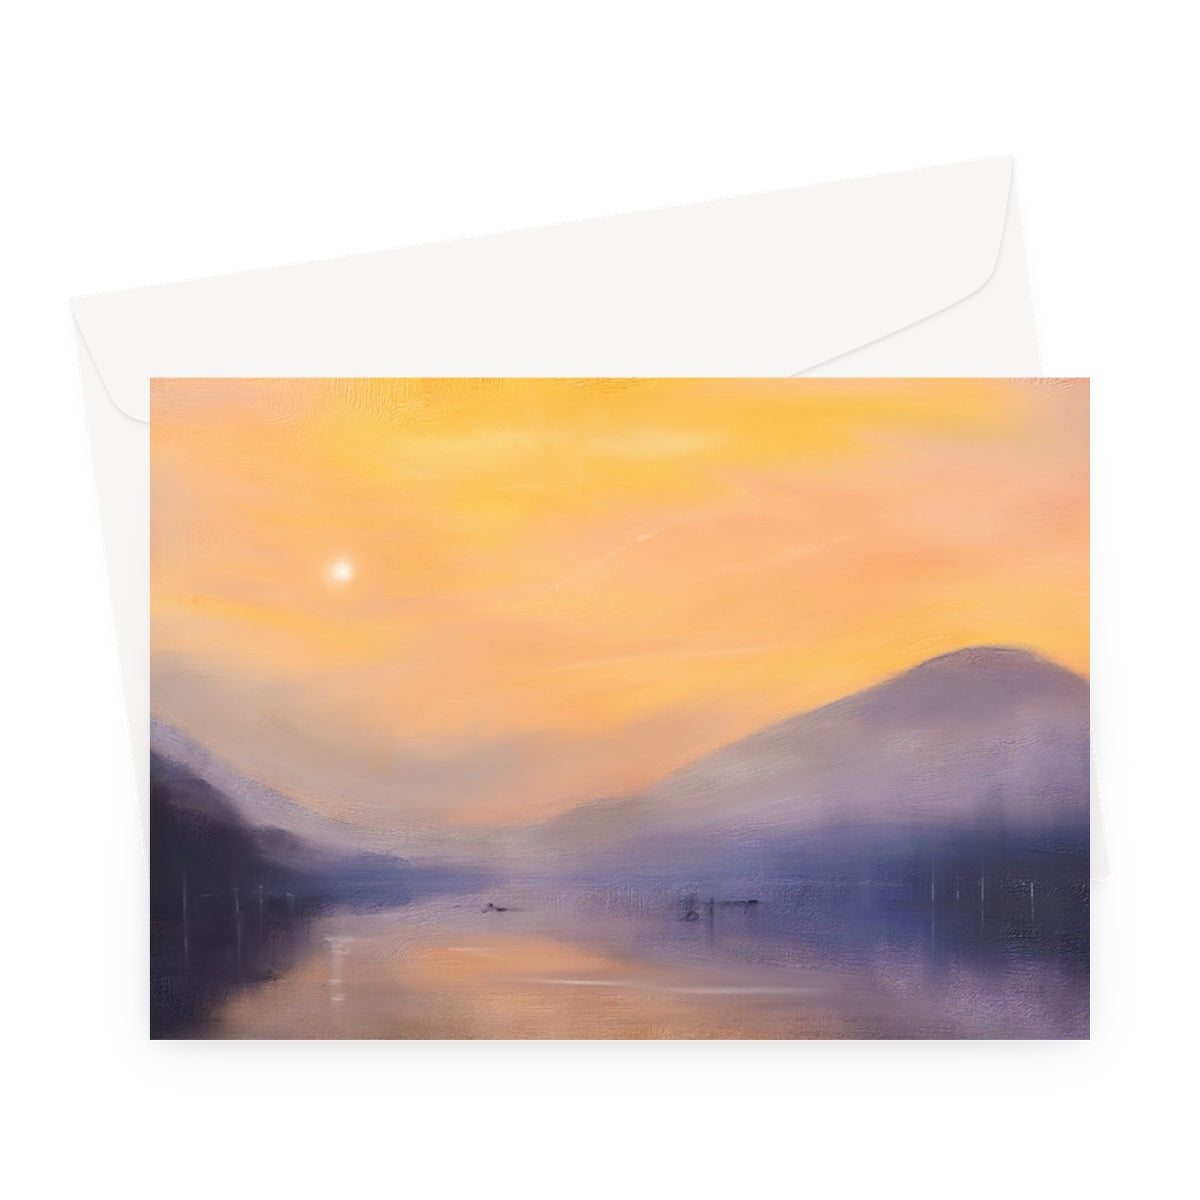 Loch Eck Dusk Art Gifts Greeting Card-Stationery-Scottish Lochs & Mountains Art Gallery-A5 Landscape-1 Card-Paintings, Prints, Homeware, Art Gifts From Scotland By Scottish Artist Kevin Hunter